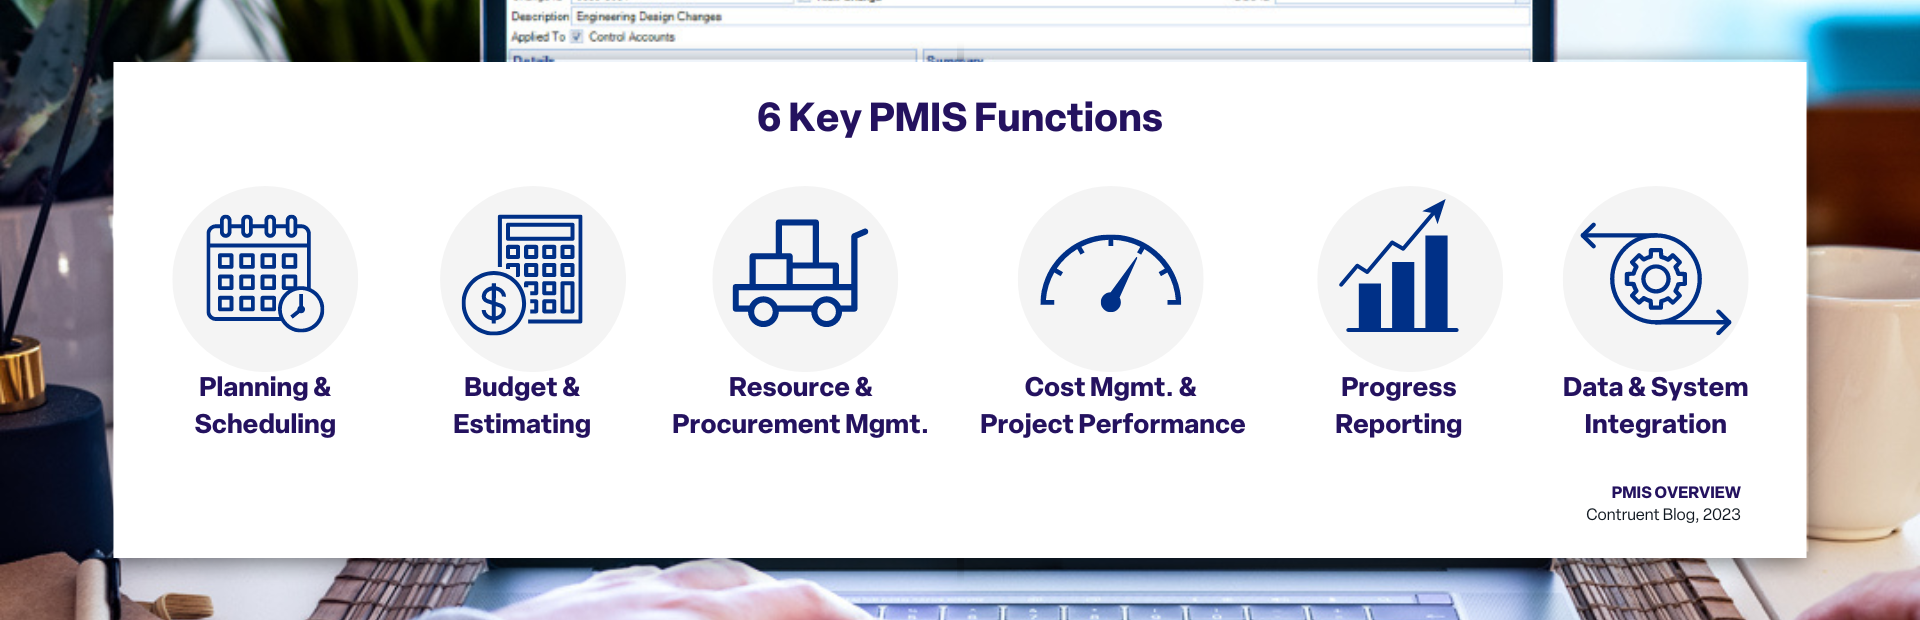 PMIS Guide Overview